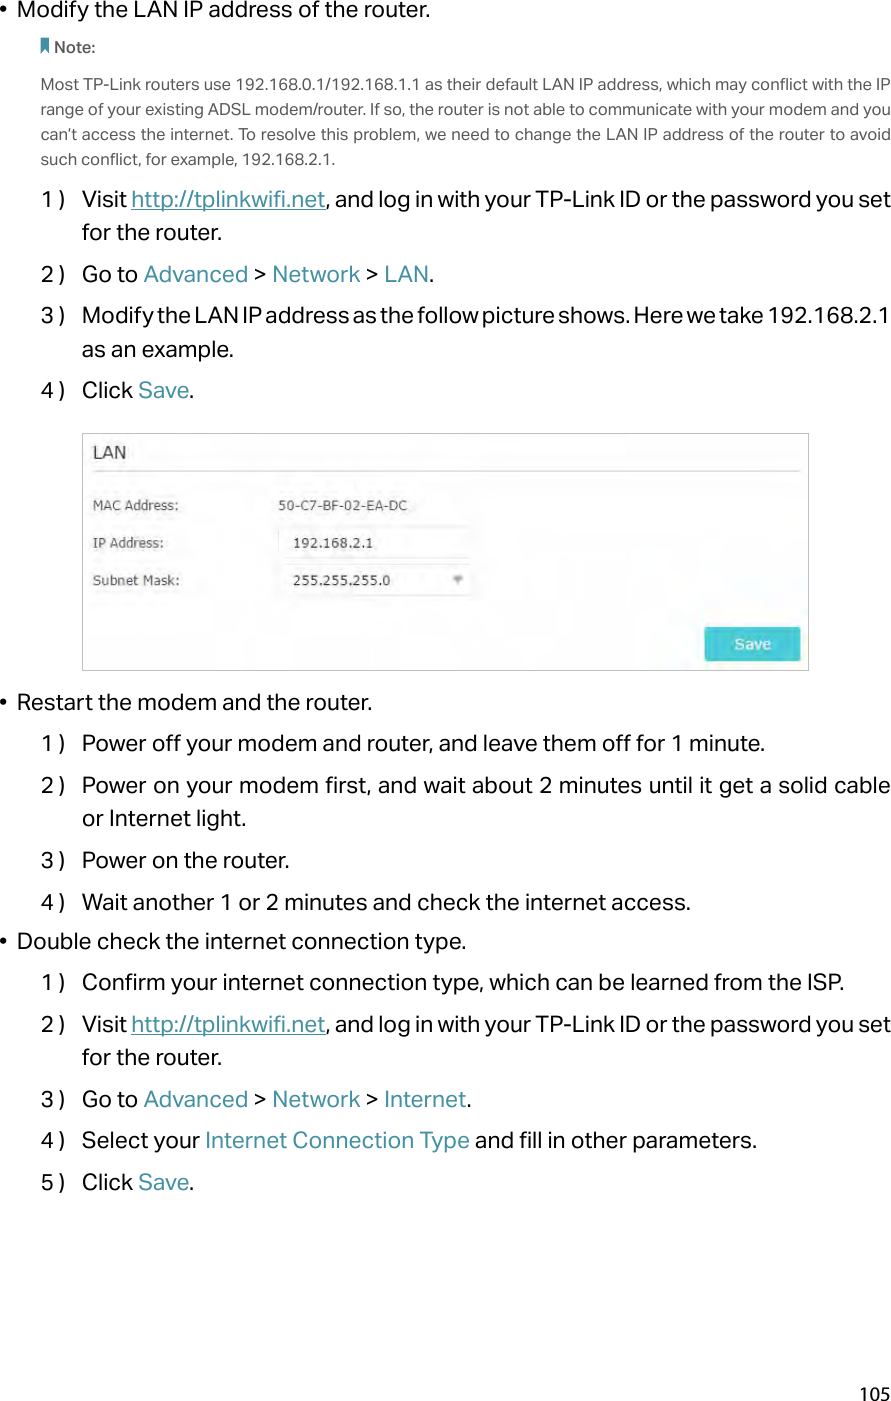 105•  Modify the LAN IP address of the router.Note: Most TP-Link routers use 192.168.0.1/192.168.1.1 as their default LAN IP address, which may conflict with the IP range of your existing ADSL modem/router. If so, the router is not able to communicate with your modem and you can’t access the internet. To resolve this problem, we need to change the LAN IP address of the router to avoid such conflict, for example, 192.168.2.1. 1 )  Visit http://tplinkwifi.net, and log in with your TP-Link ID or the password you set for the router.2 )  Go to Advanced &gt; Network &gt; LAN.3 )  Modify the LAN IP address as the follow picture shows. Here we take 192.168.2.1 as an example.4 )  Click Save.•  Restart the modem and the router.1 )  Power off your modem and router, and leave them off for 1 minute.2 )  Power on your modem first, and wait about 2 minutes until it get a solid cable or Internet light.3 )  Power on the router.4 )  Wait another 1 or 2 minutes and check the internet access.•  Double check the internet connection type.1 )  Confirm your internet connection type, which can be learned from the ISP.2 )  Visit http://tplinkwifi.net, and log in with your TP-Link ID or the password you set for the router.3 )  Go to Advanced &gt; Network &gt; Internet.4 )  Select your Internet Connection Type and fill in other parameters.5 )  Click Save.